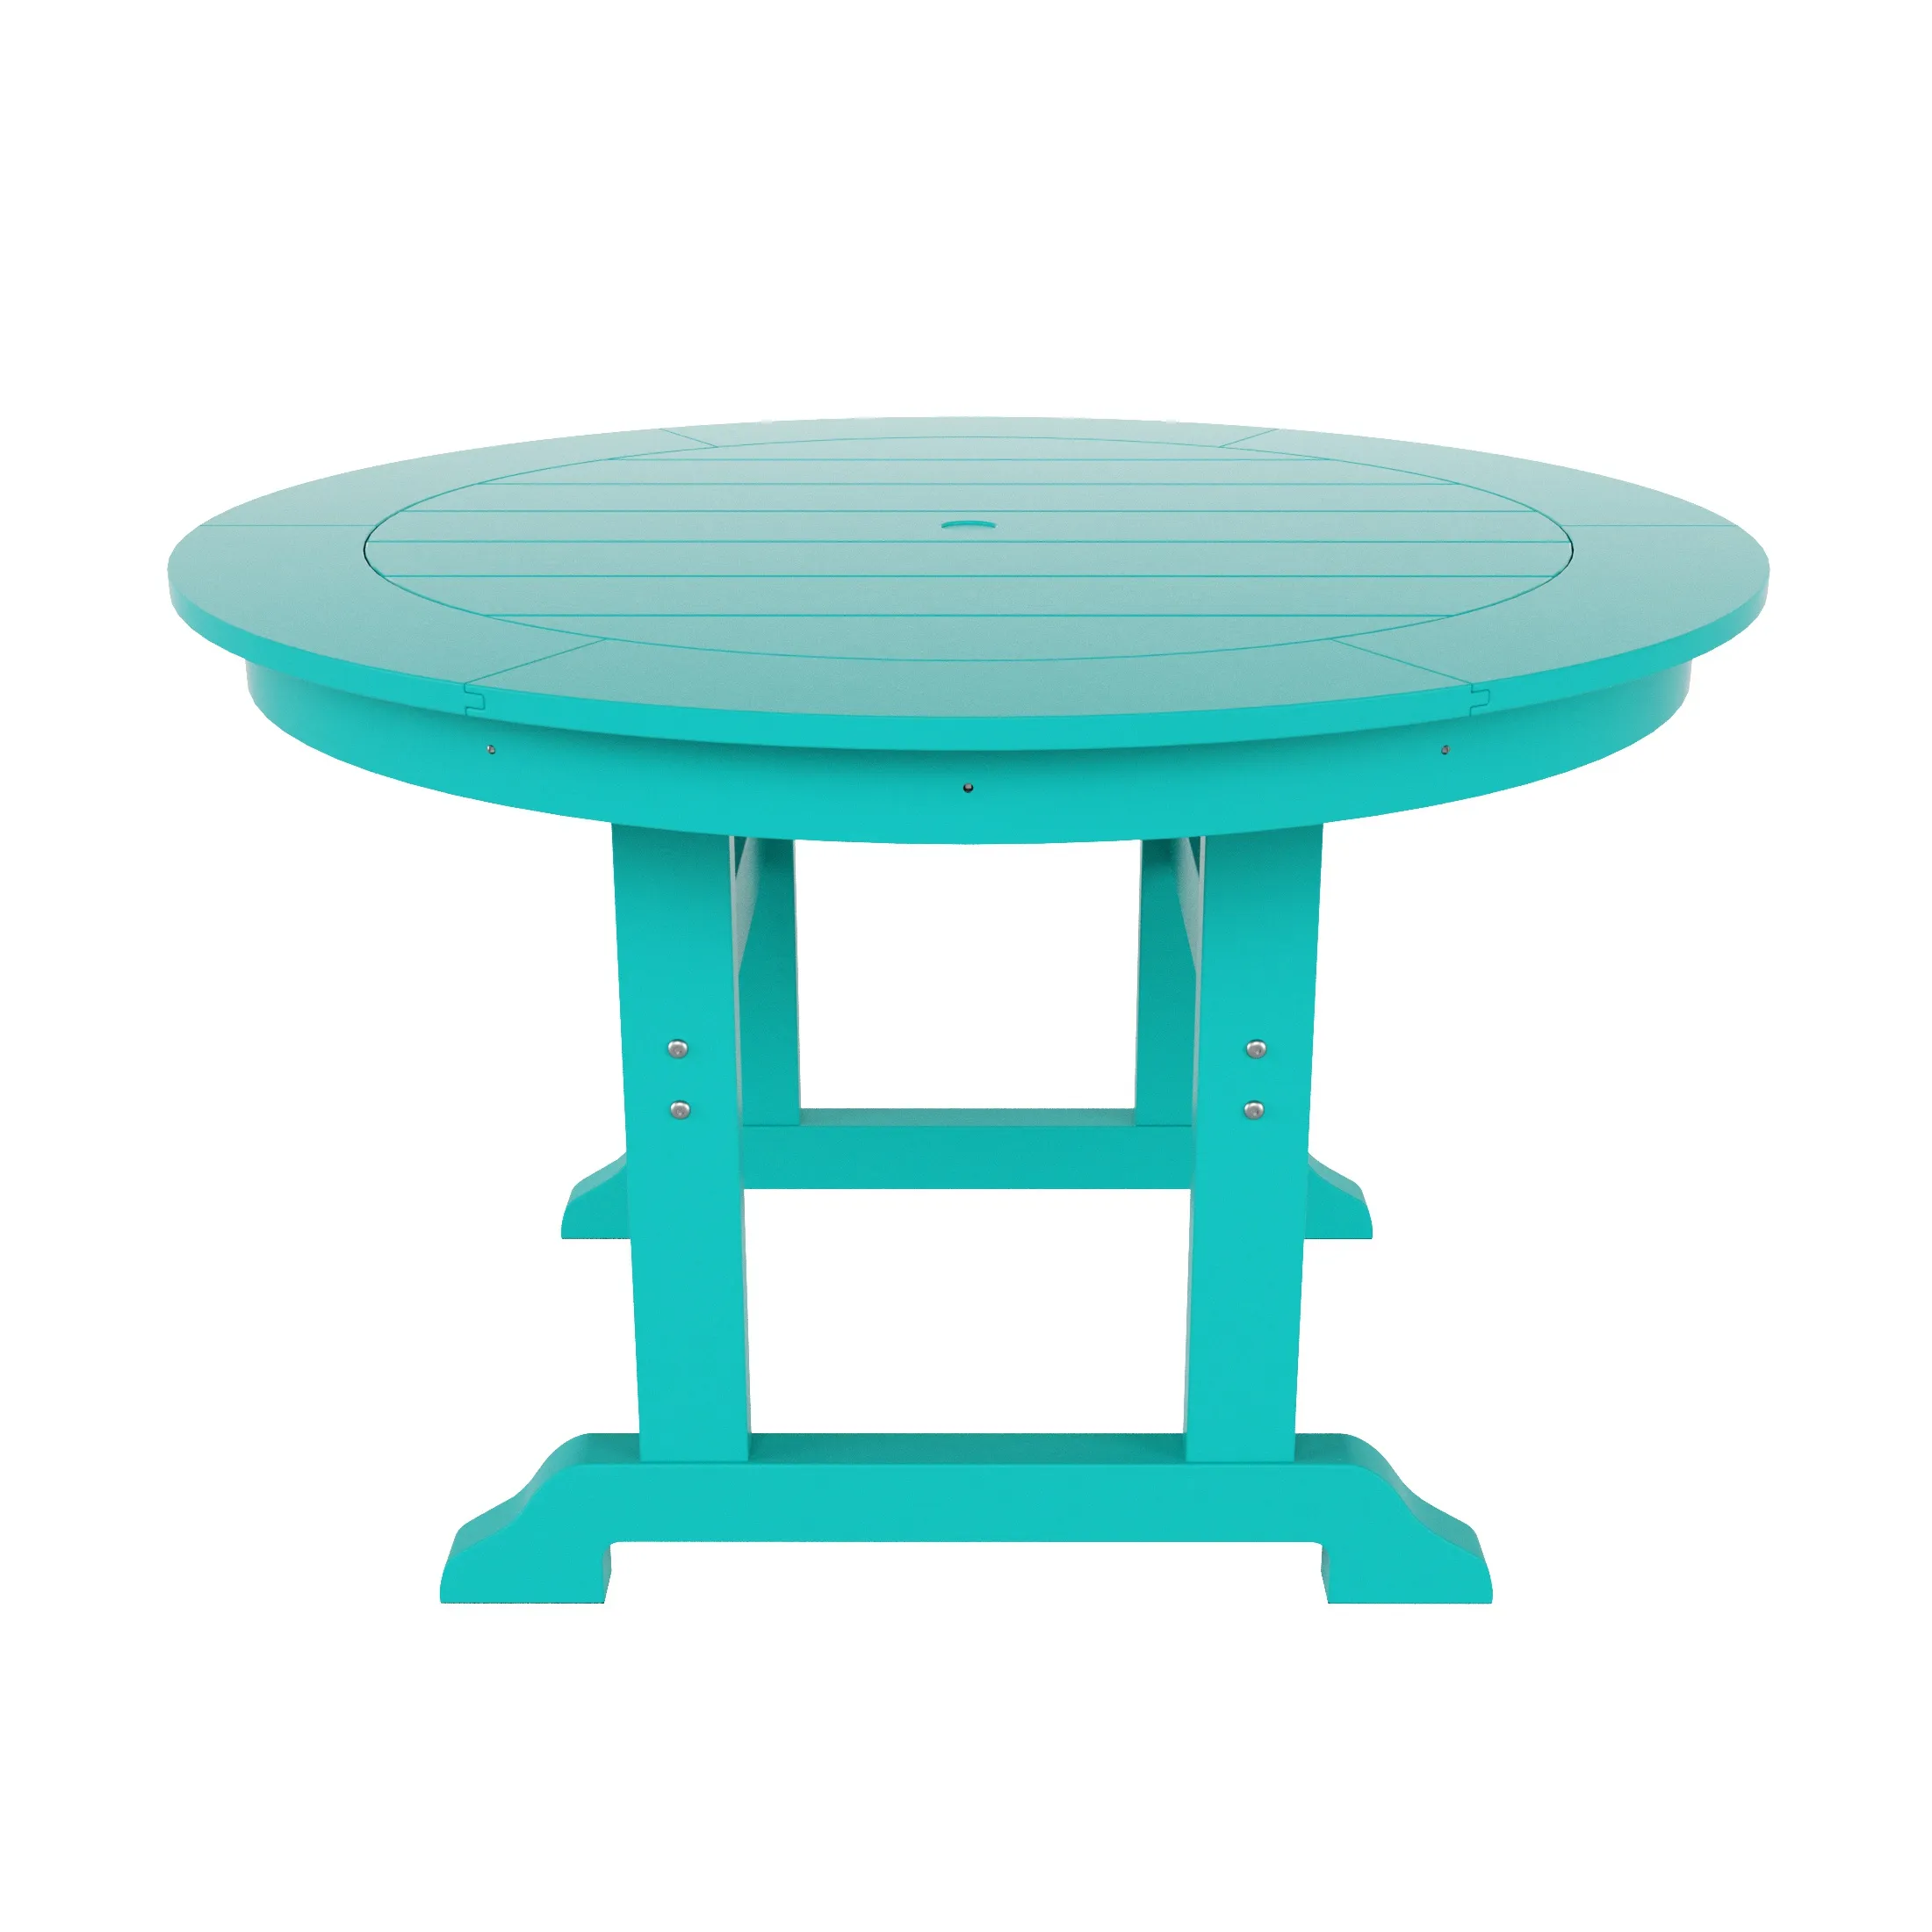 WestinTrends 47" Round Outdoor Patio Dining Table